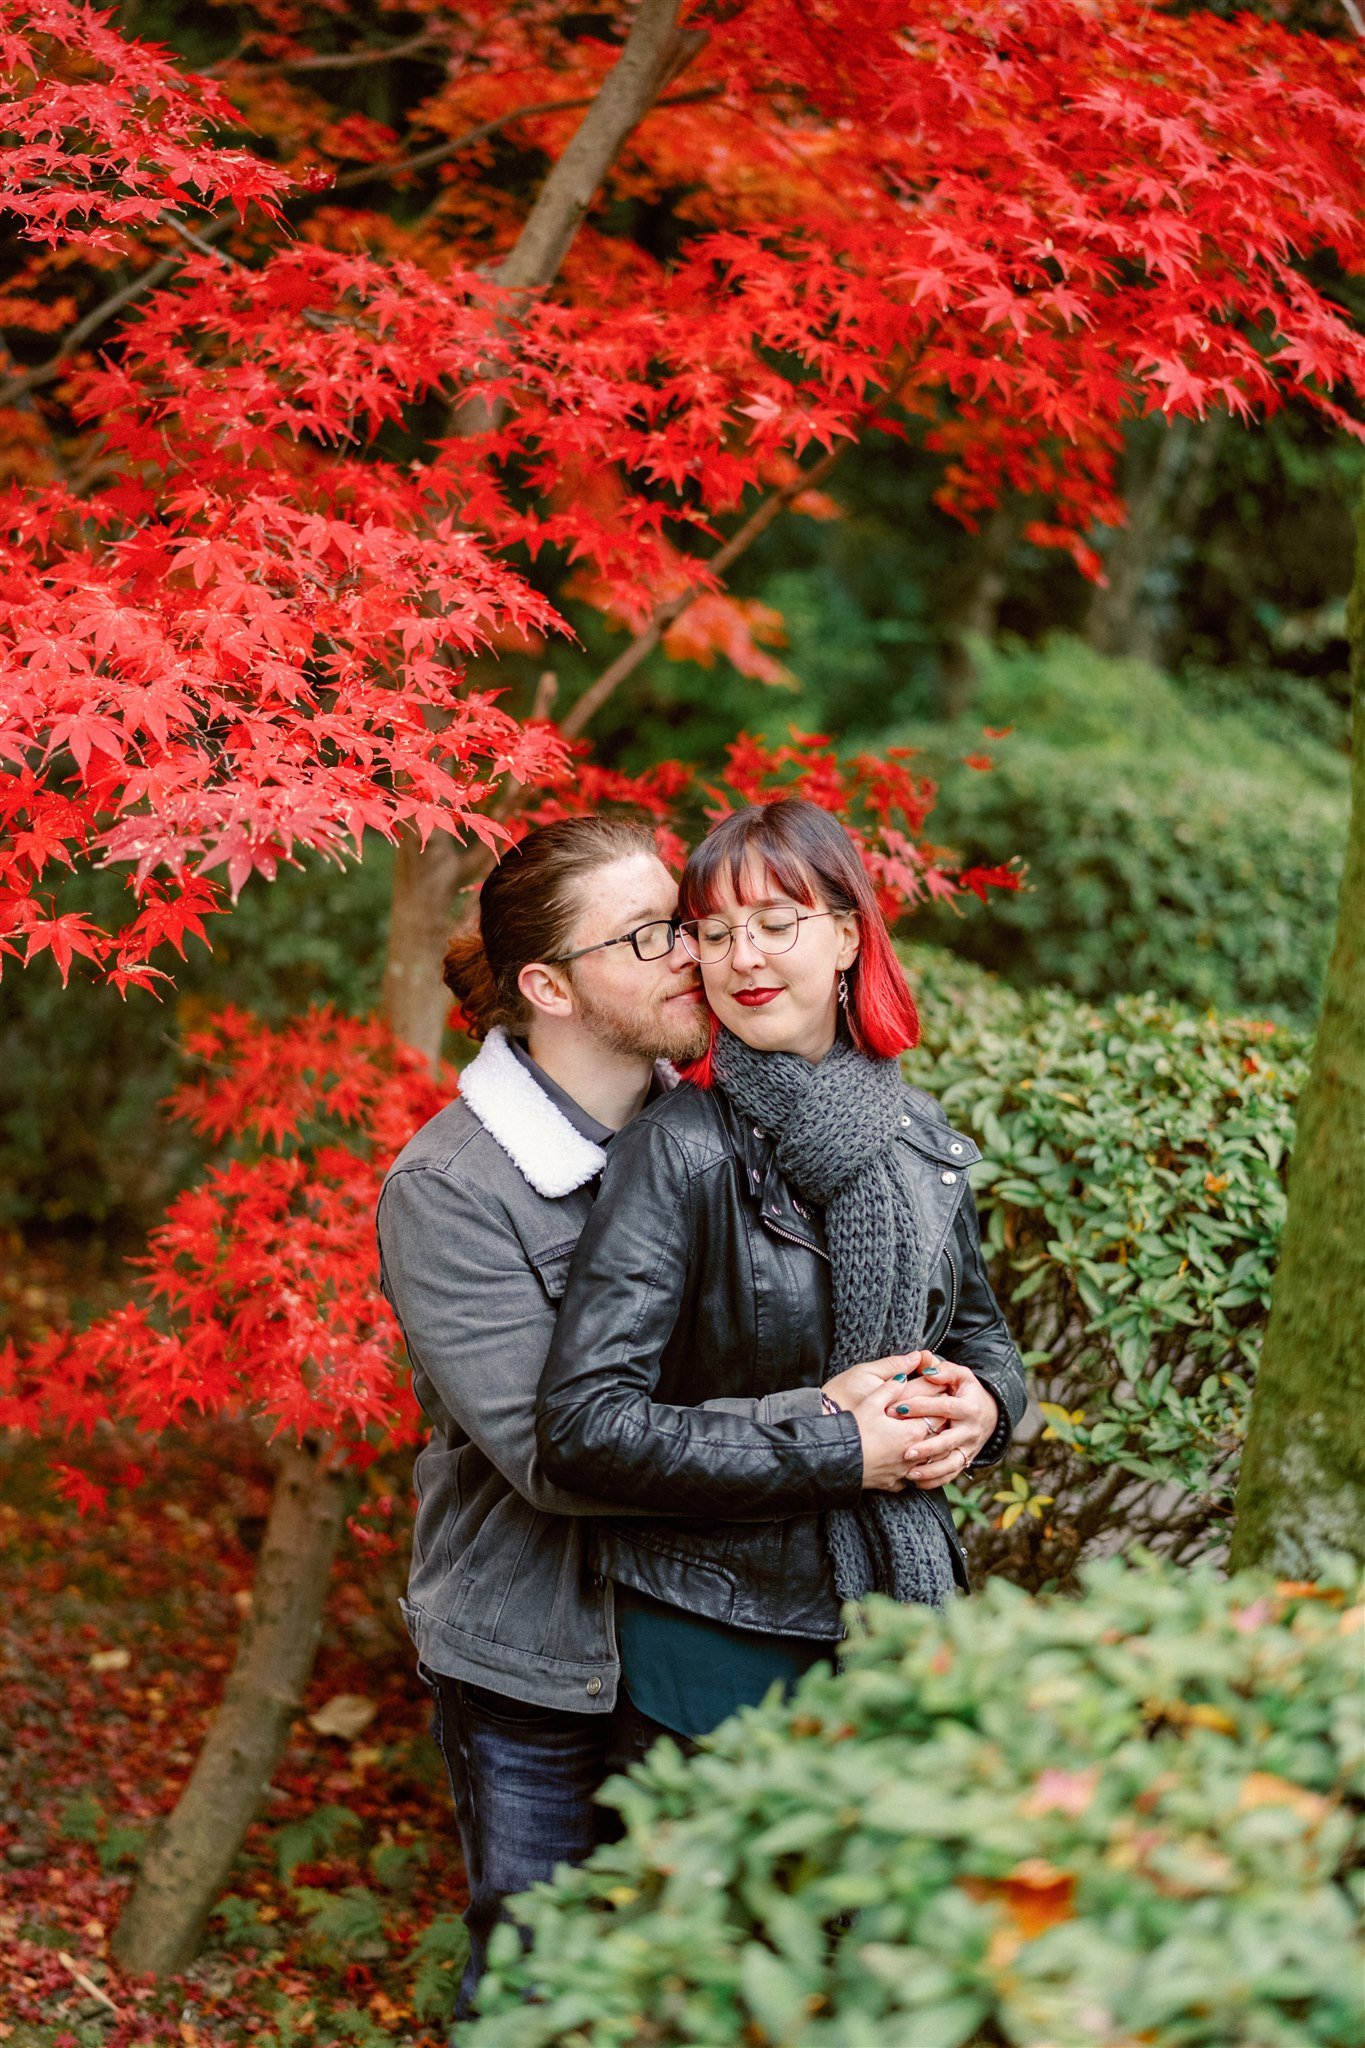 Couple hug during their engagement photoshoot in front of vibrant red autumn leaves.